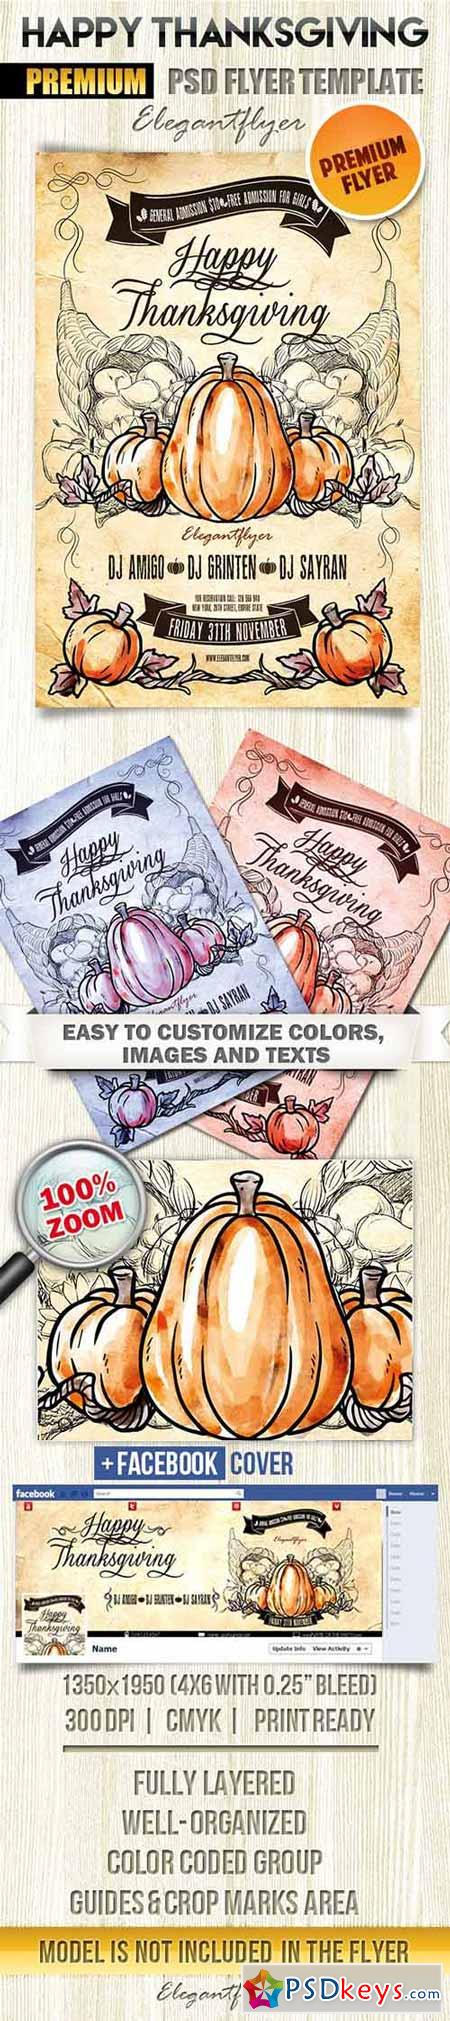 Happy Thanksgiving Flyer PSD Template + Facebook Cover